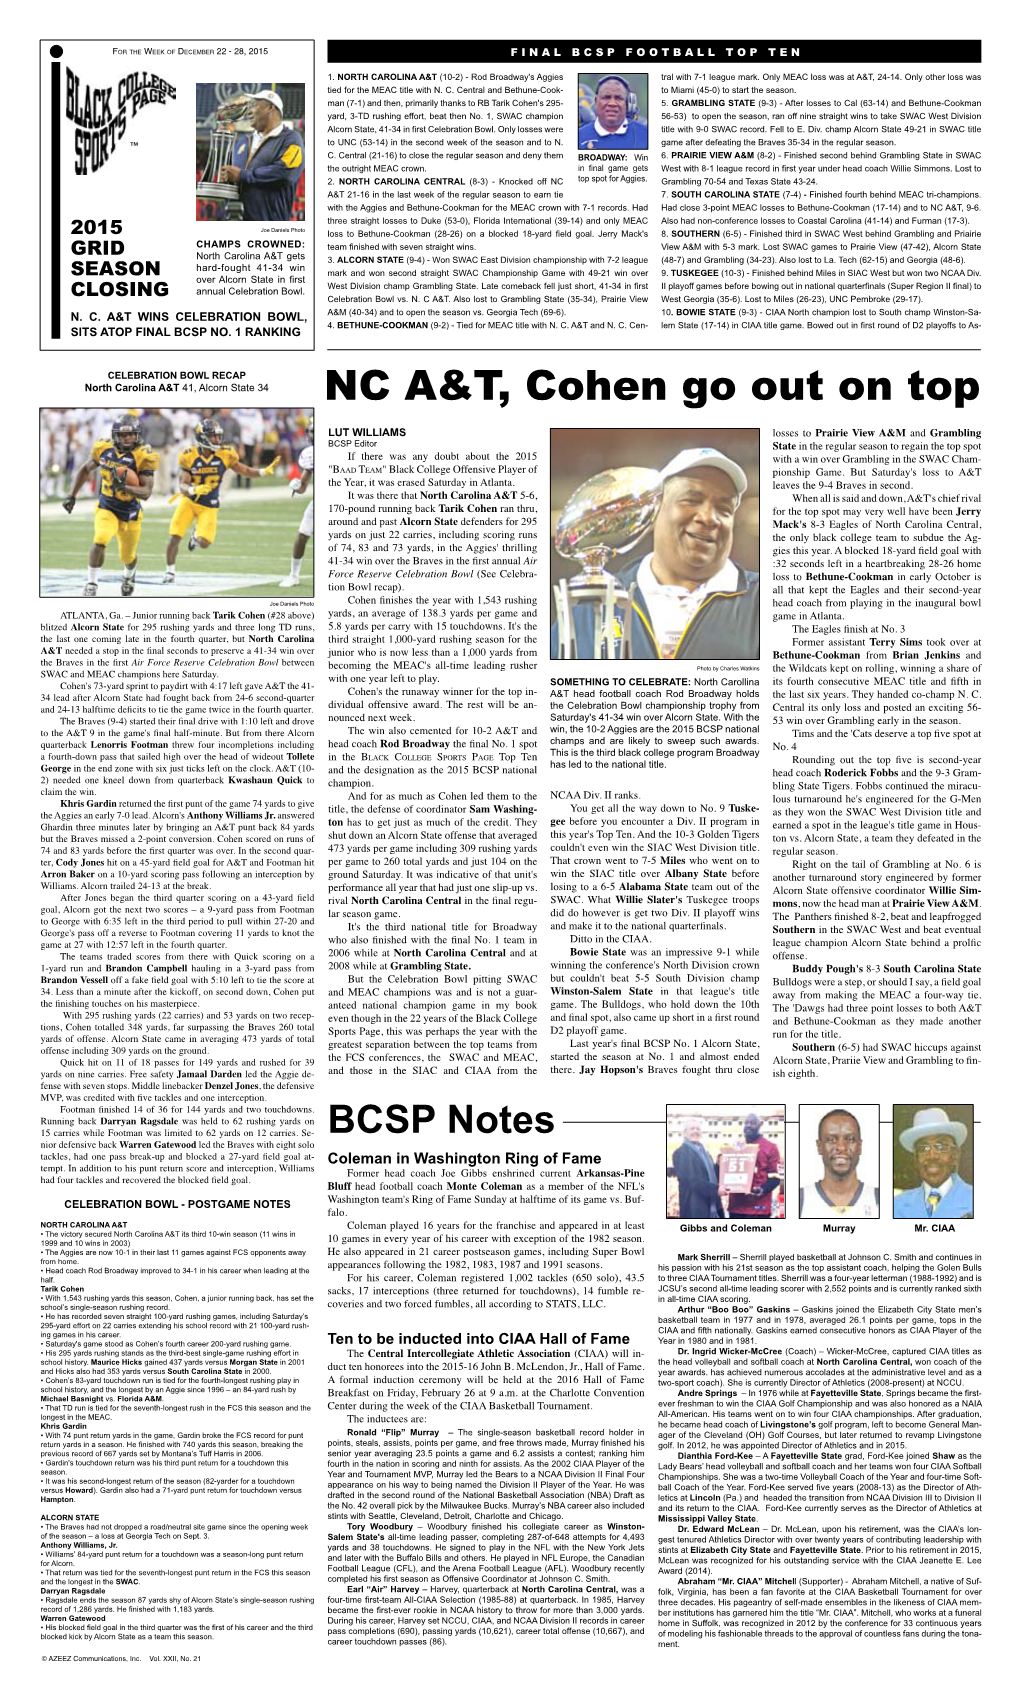 NC A&T, Cohen Go out On